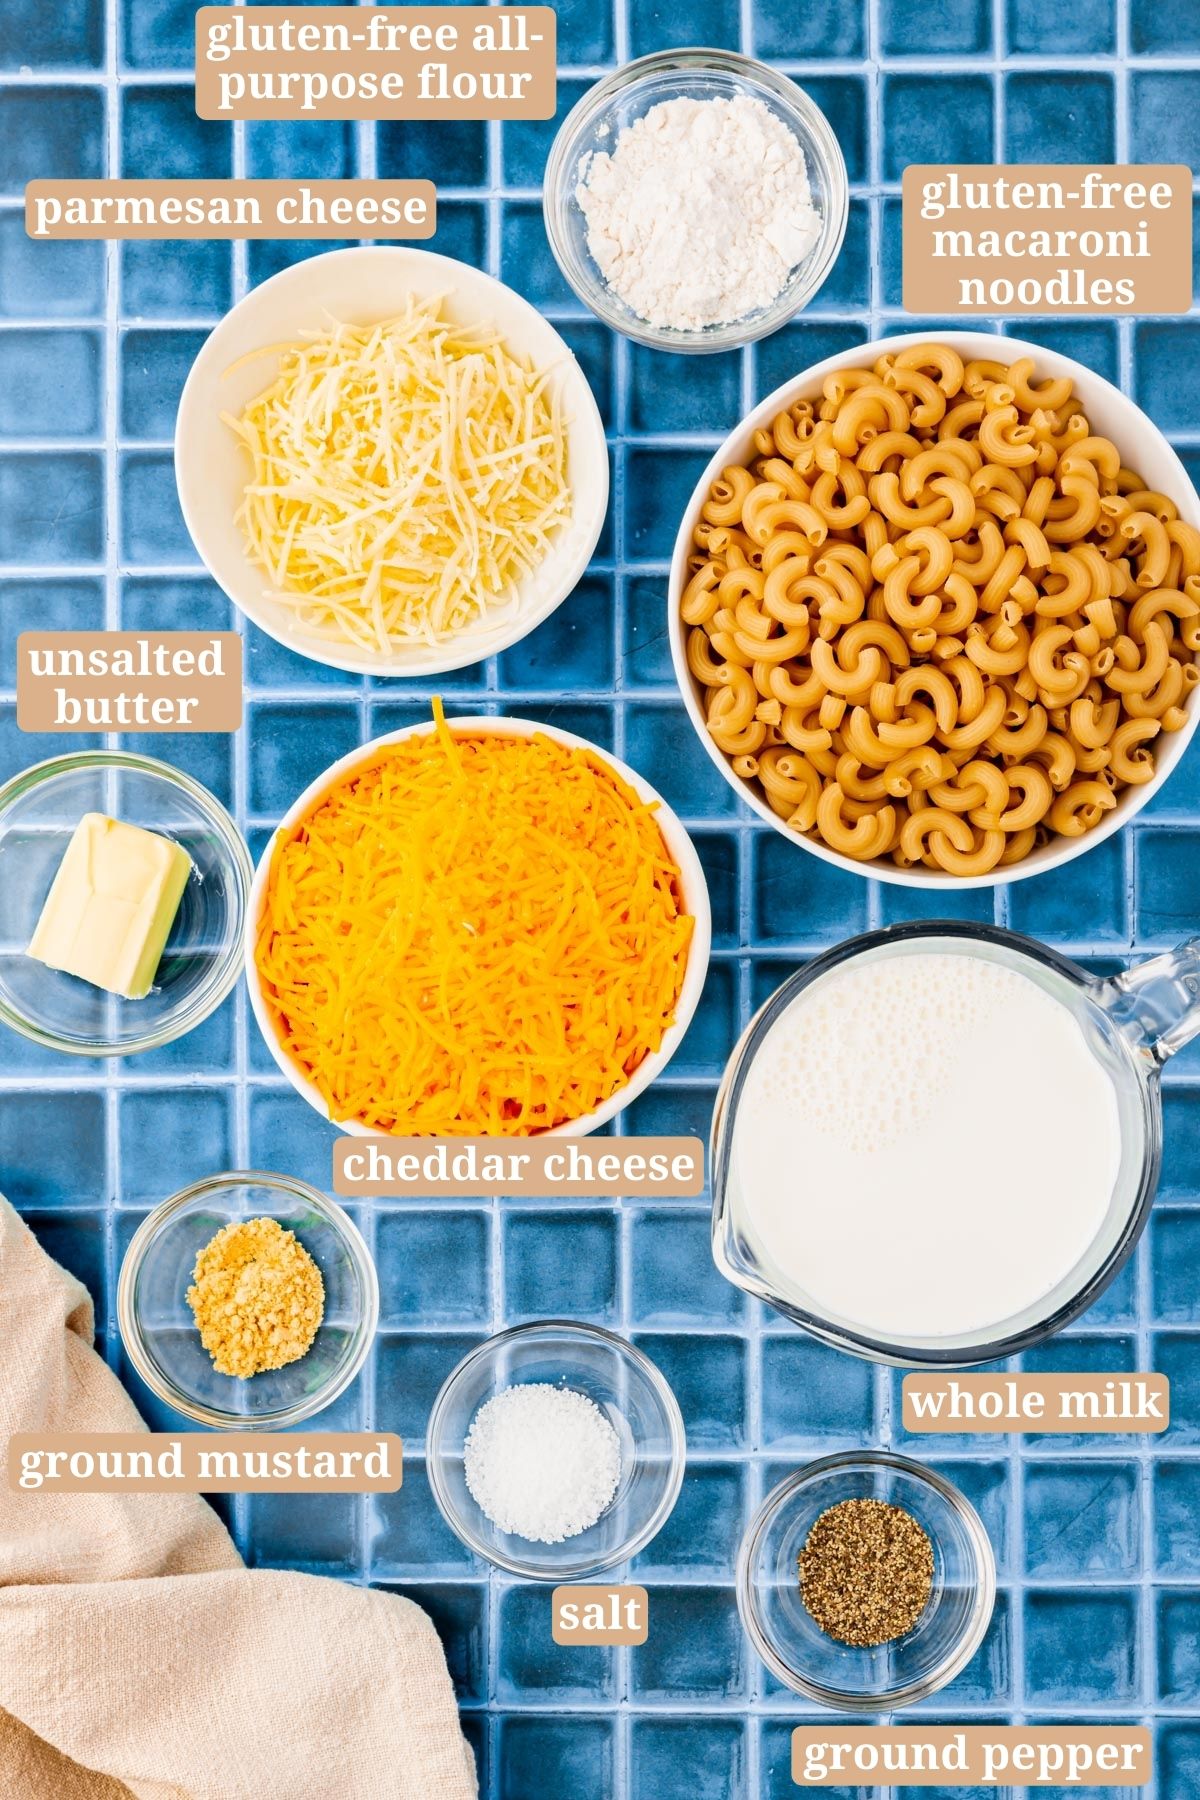 The ingredients for making gluten-free mac and cheese.